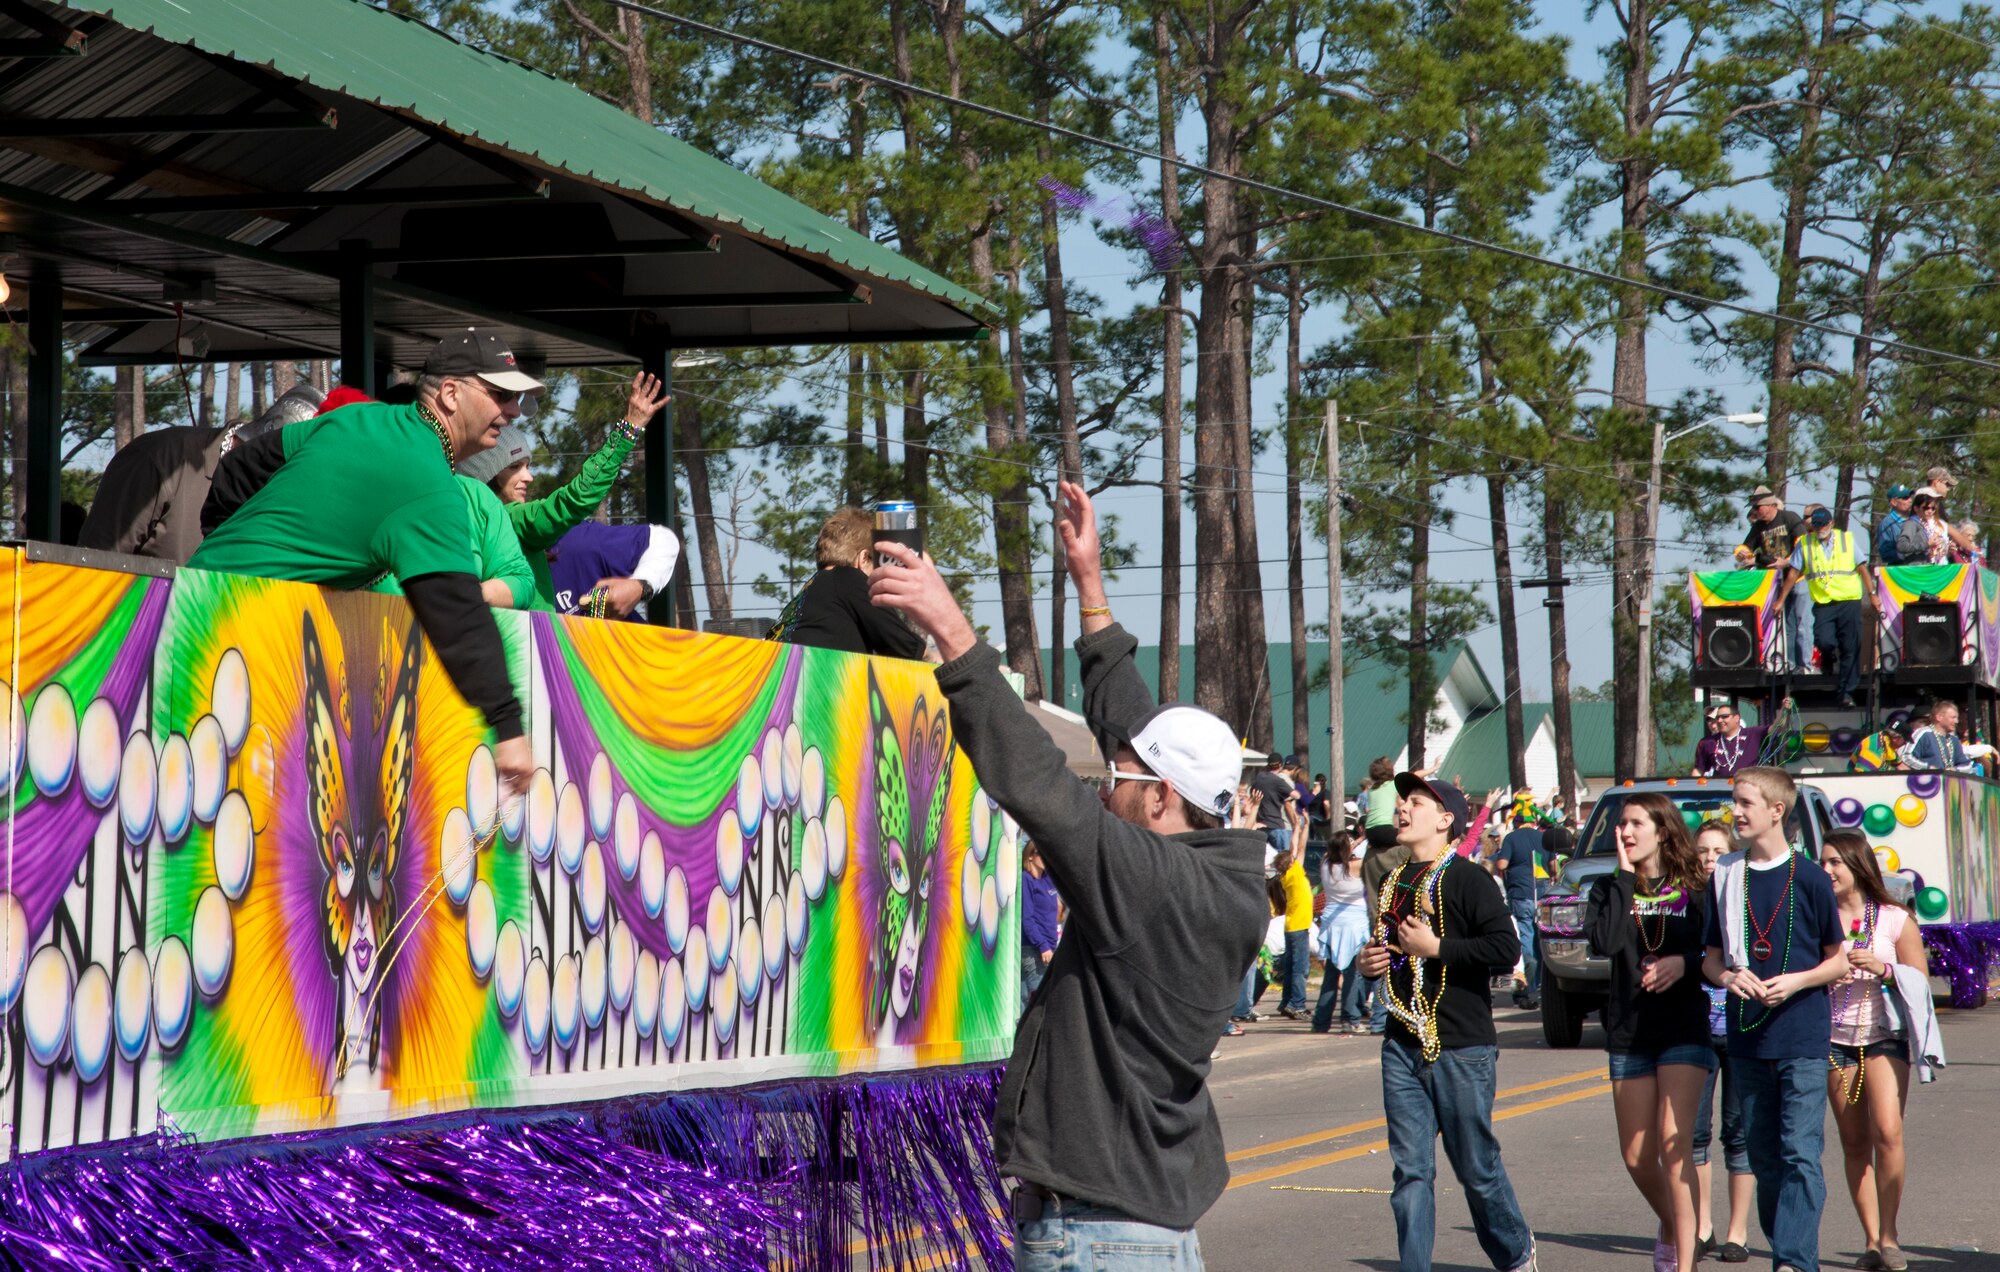 Brig. Gen. James Muscatell, 403rd Wing commander and his wife, Nancy, throw beads to the crowd from the City of D'Iberville's float at the annual Mardi Gras parade March 6 in D'Iberville, Miss.  General and Mrs. Muscatell were asked by the city to represent the 403rd Wing, Keesler Air Force Base, Miss.  (U.S. Air Force photo by Tech. Sgt. Tanya King)